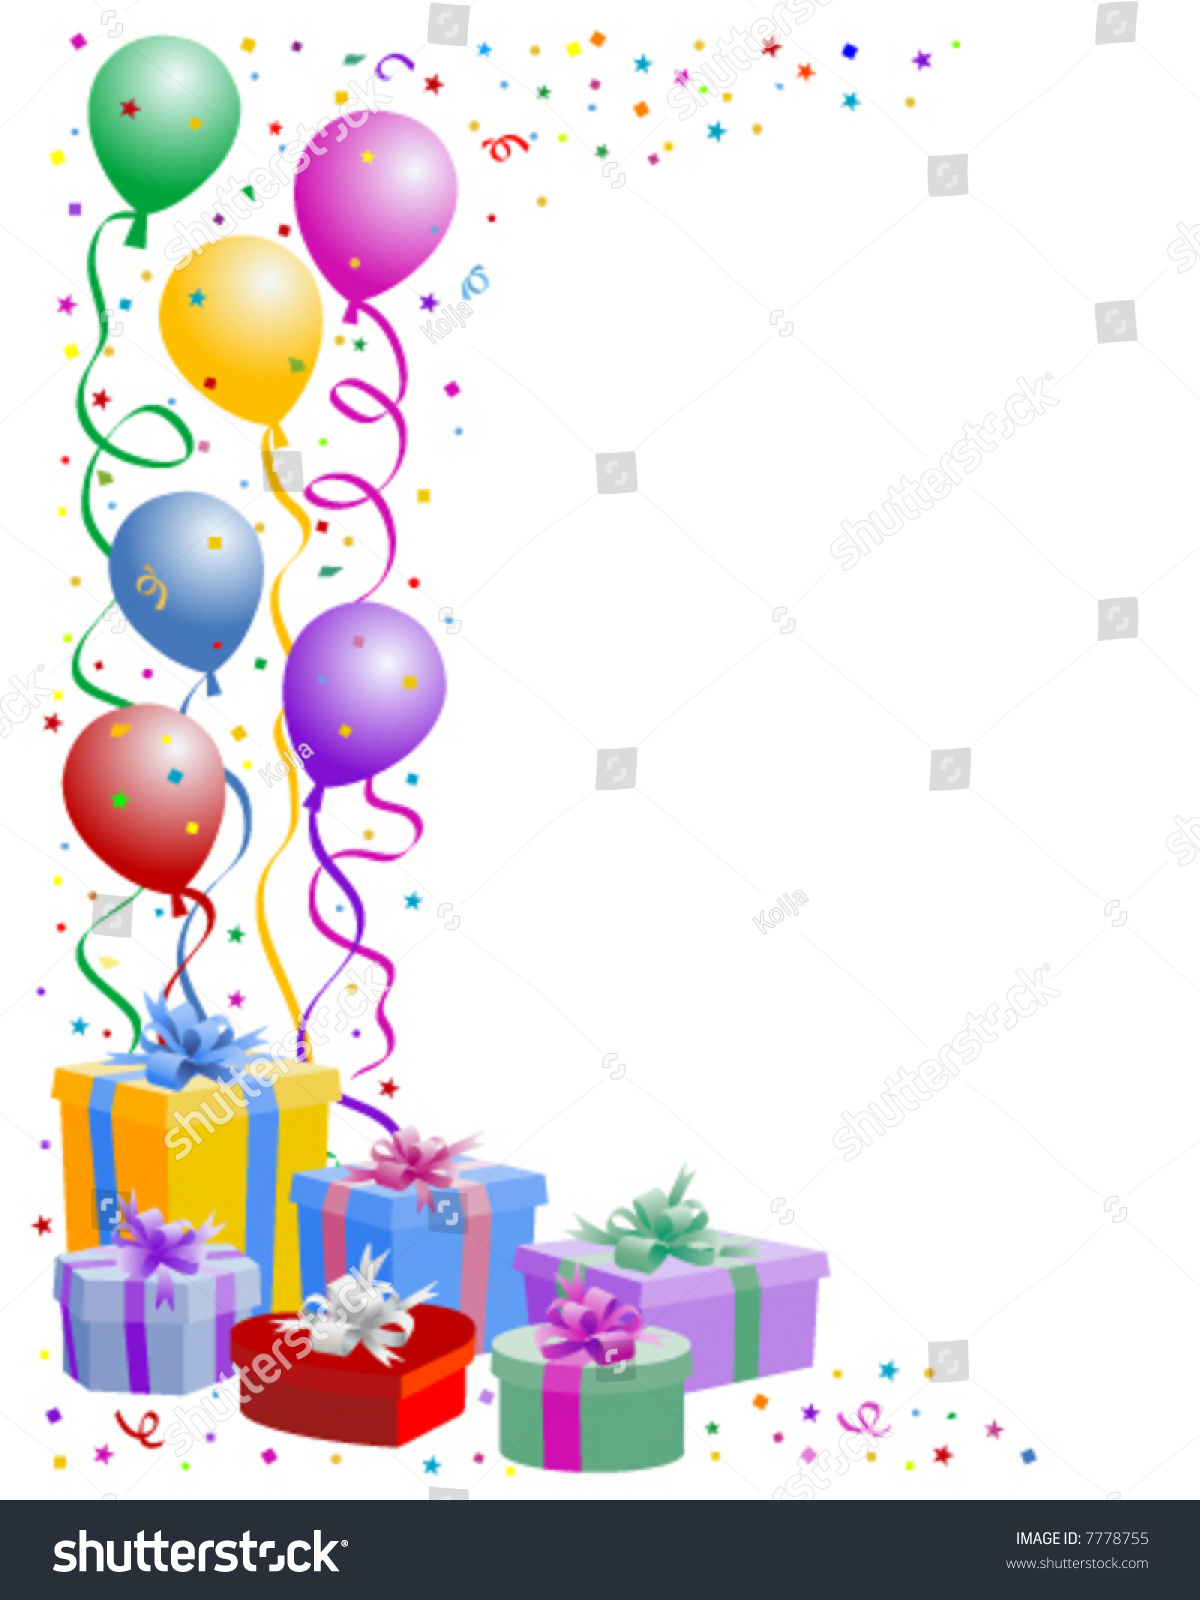 Birthday Balloons With Gifts Boxes - Vector - 7778755 : Shutterstock